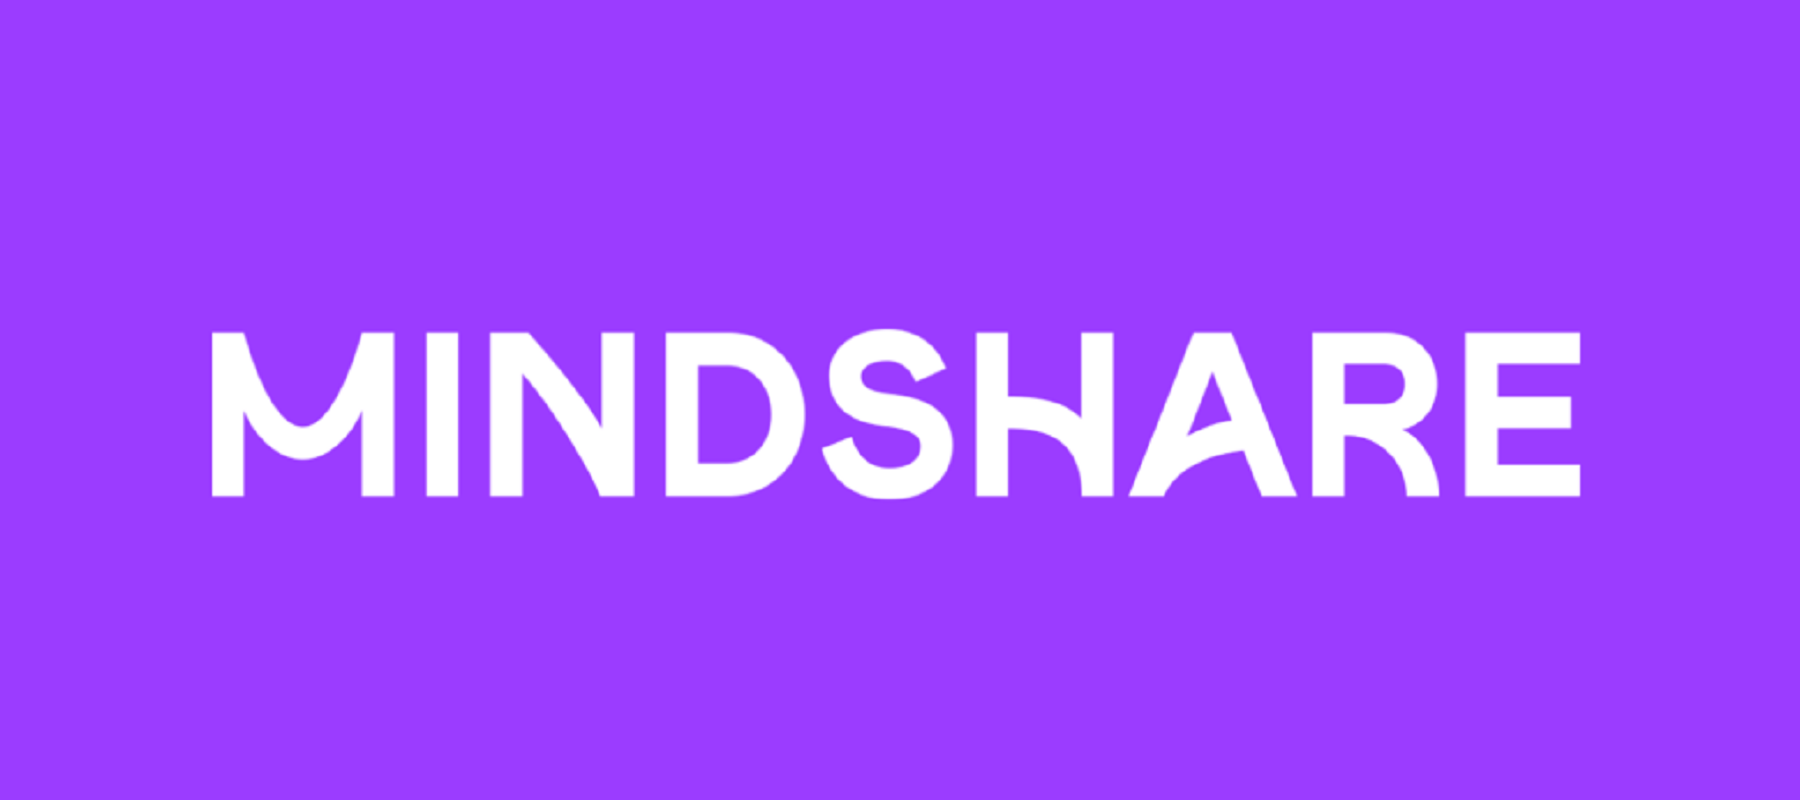 Mindshare named Cannes Lions Media Network of the Year